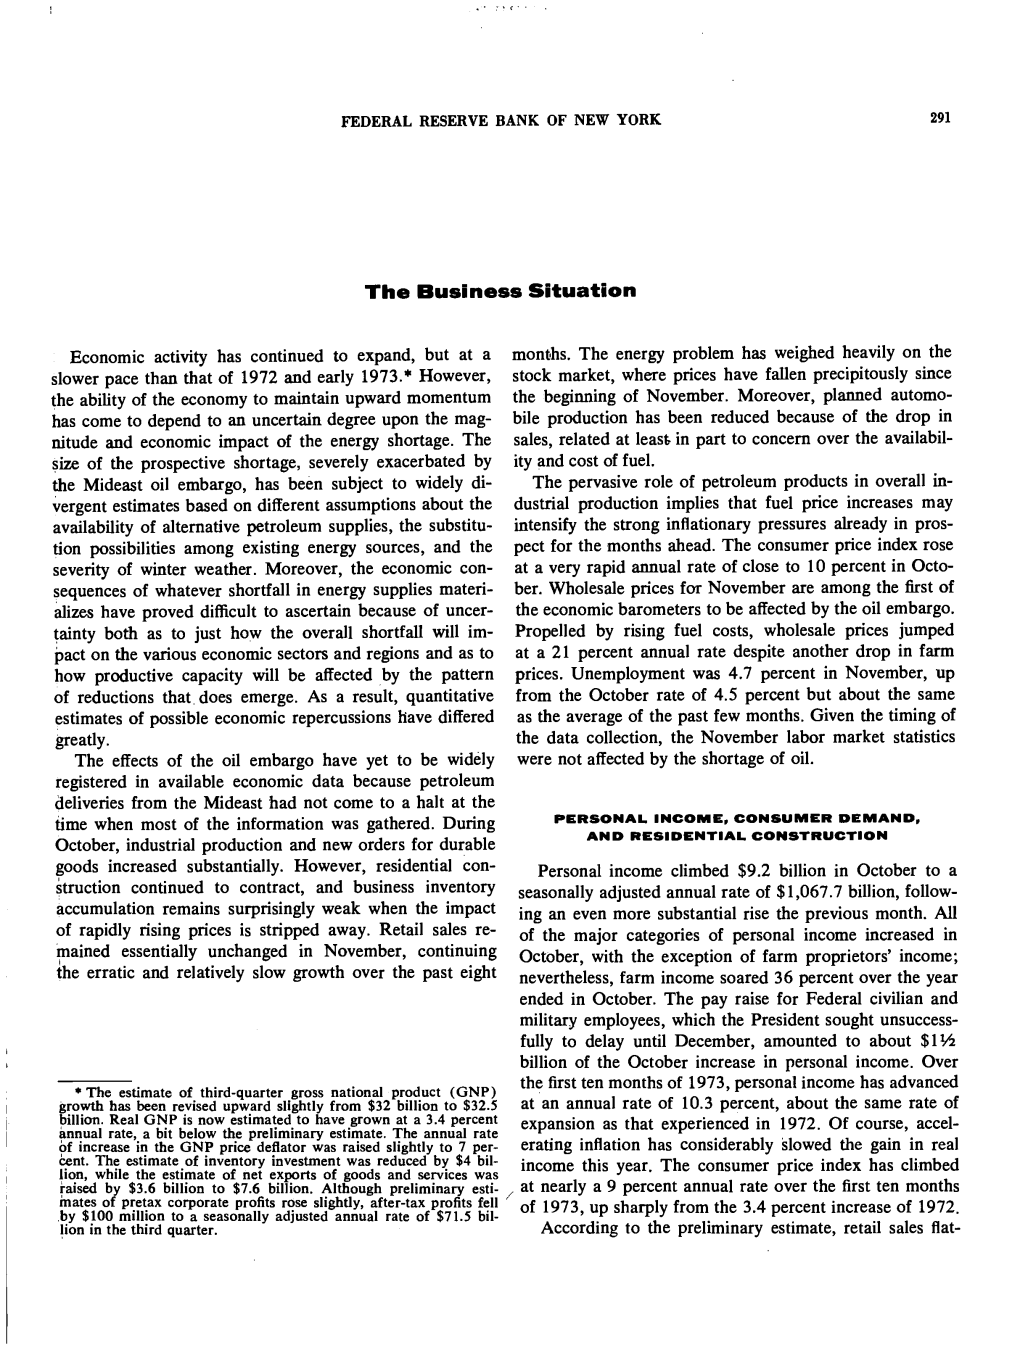 The Business Situation, December 1973